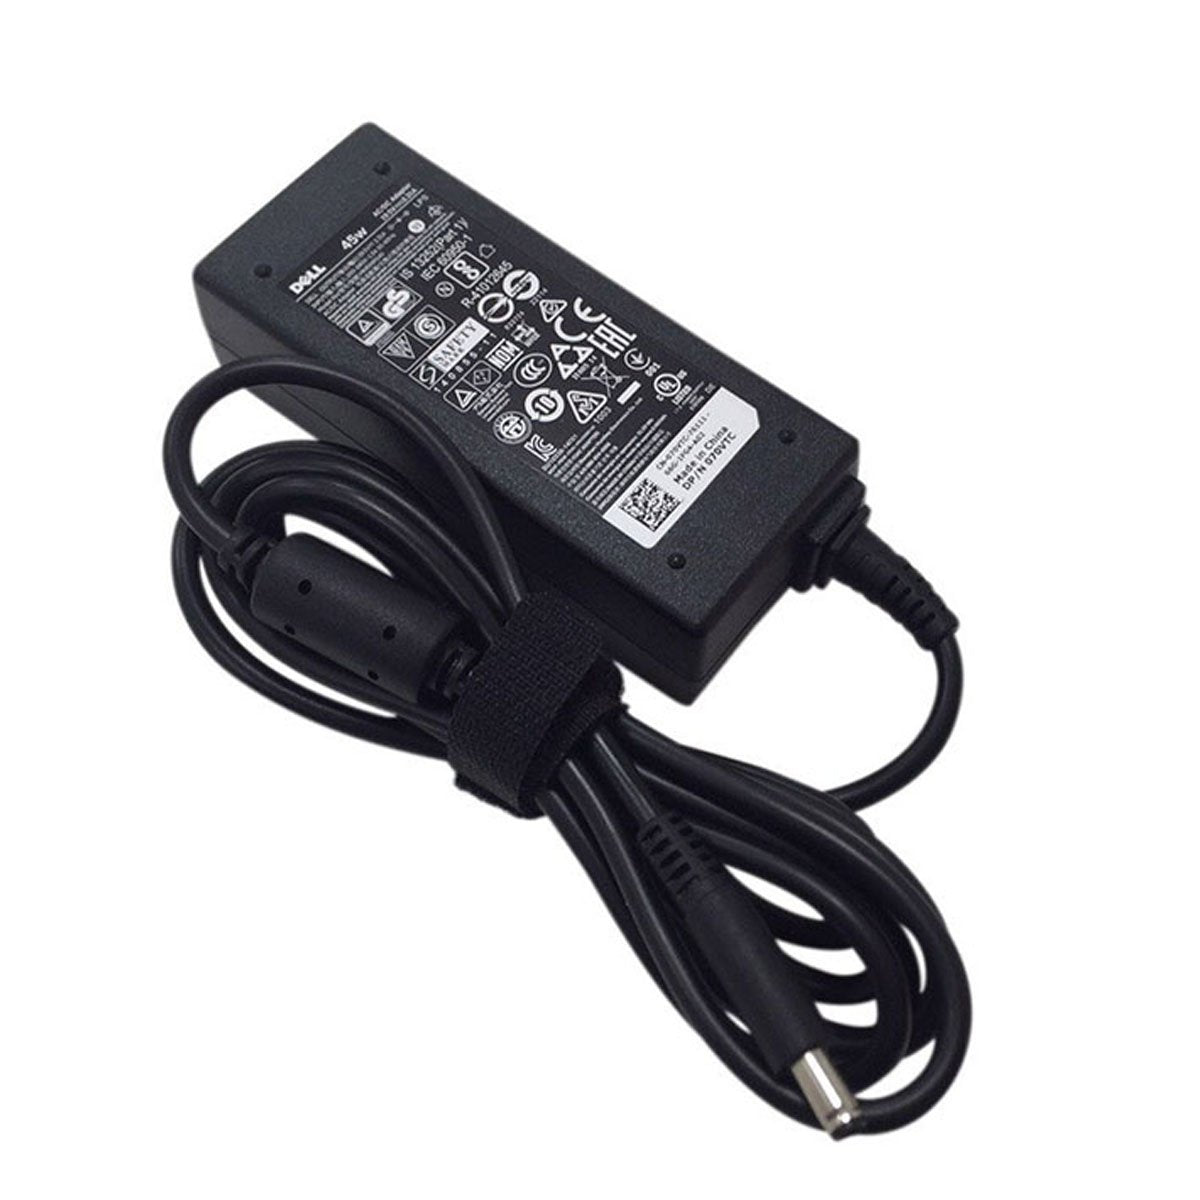 Dell Original 45W 19.5V 4.5mm Pin Laptop Charger Adapter for Inspiron 14 3462 With Power Cord